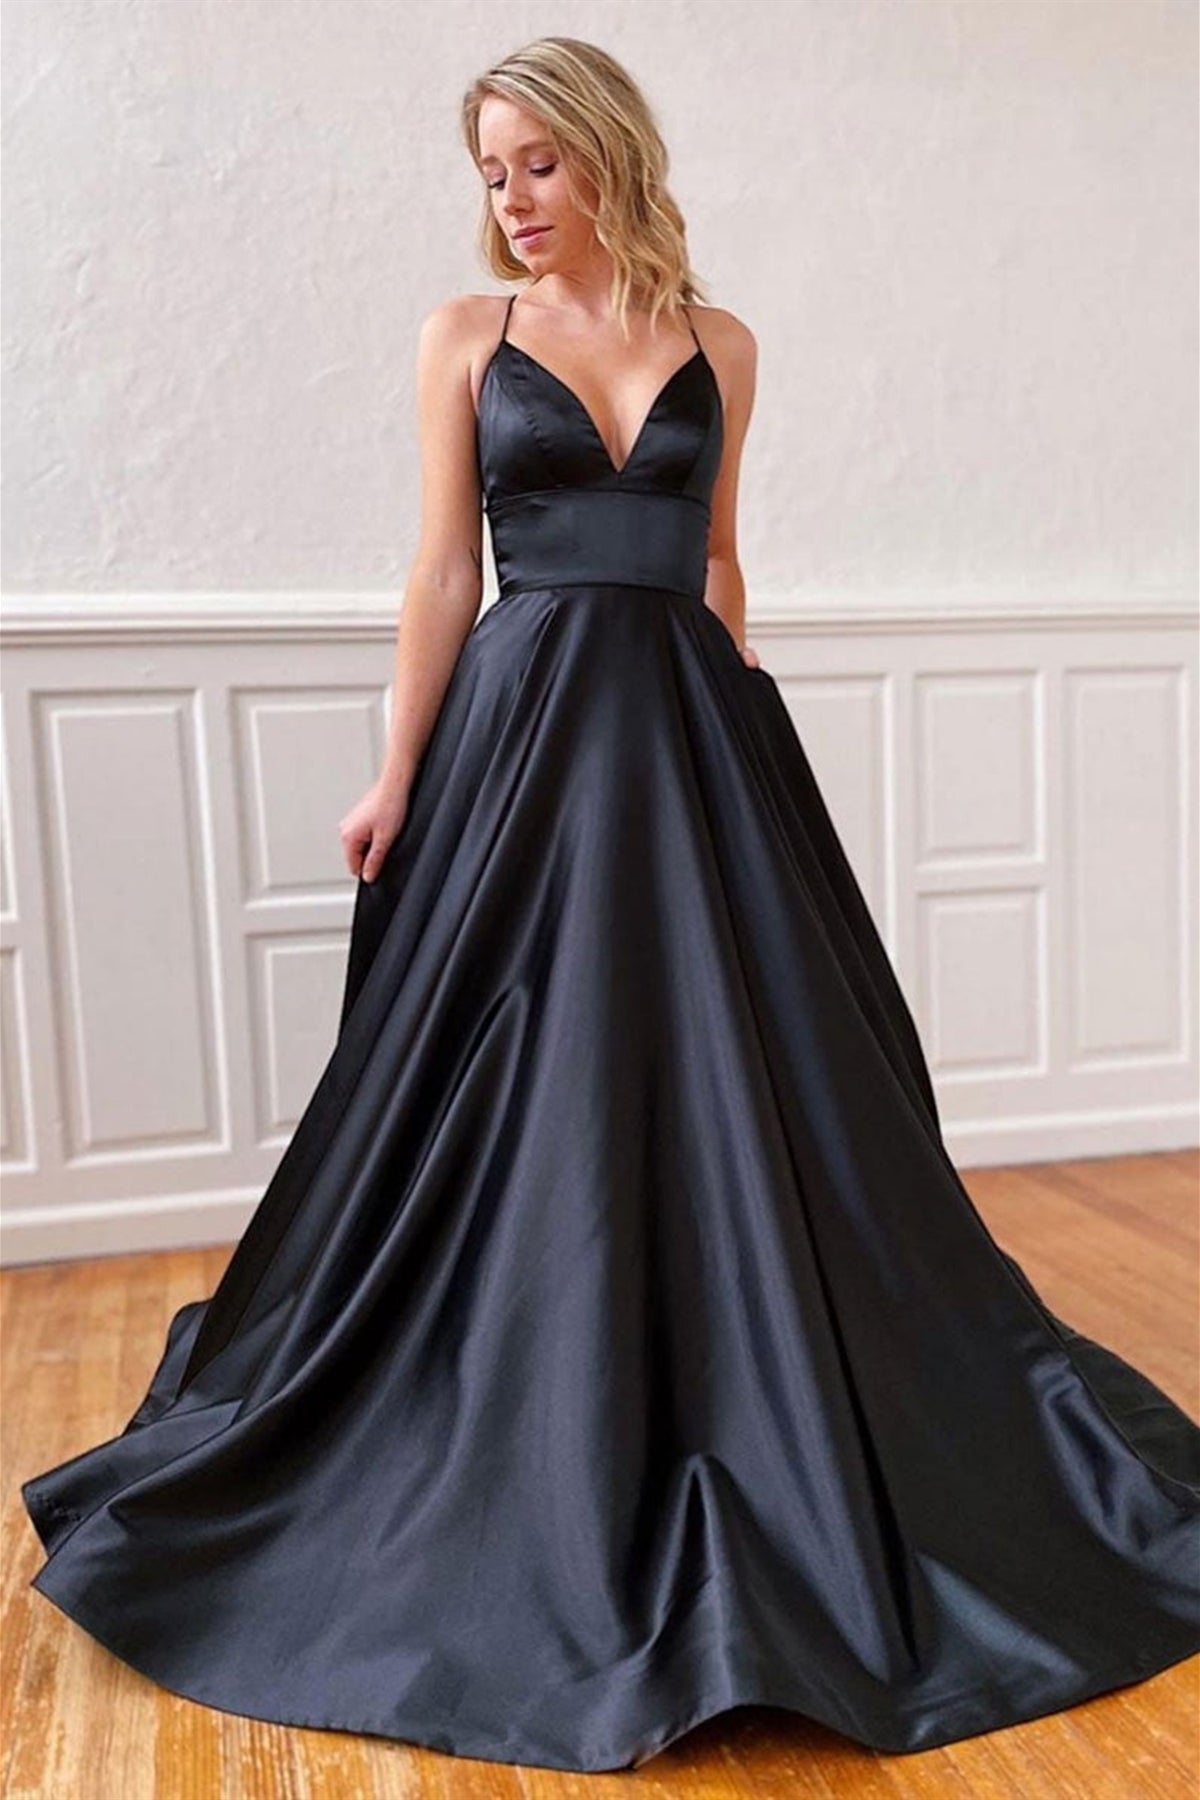 Black Ball Gown Long Prom Dresses Sexy Strapless Backless Evening Dress  Party For Women 2021 Chiffon Vestido De Festa From 78,47 € | DHgate